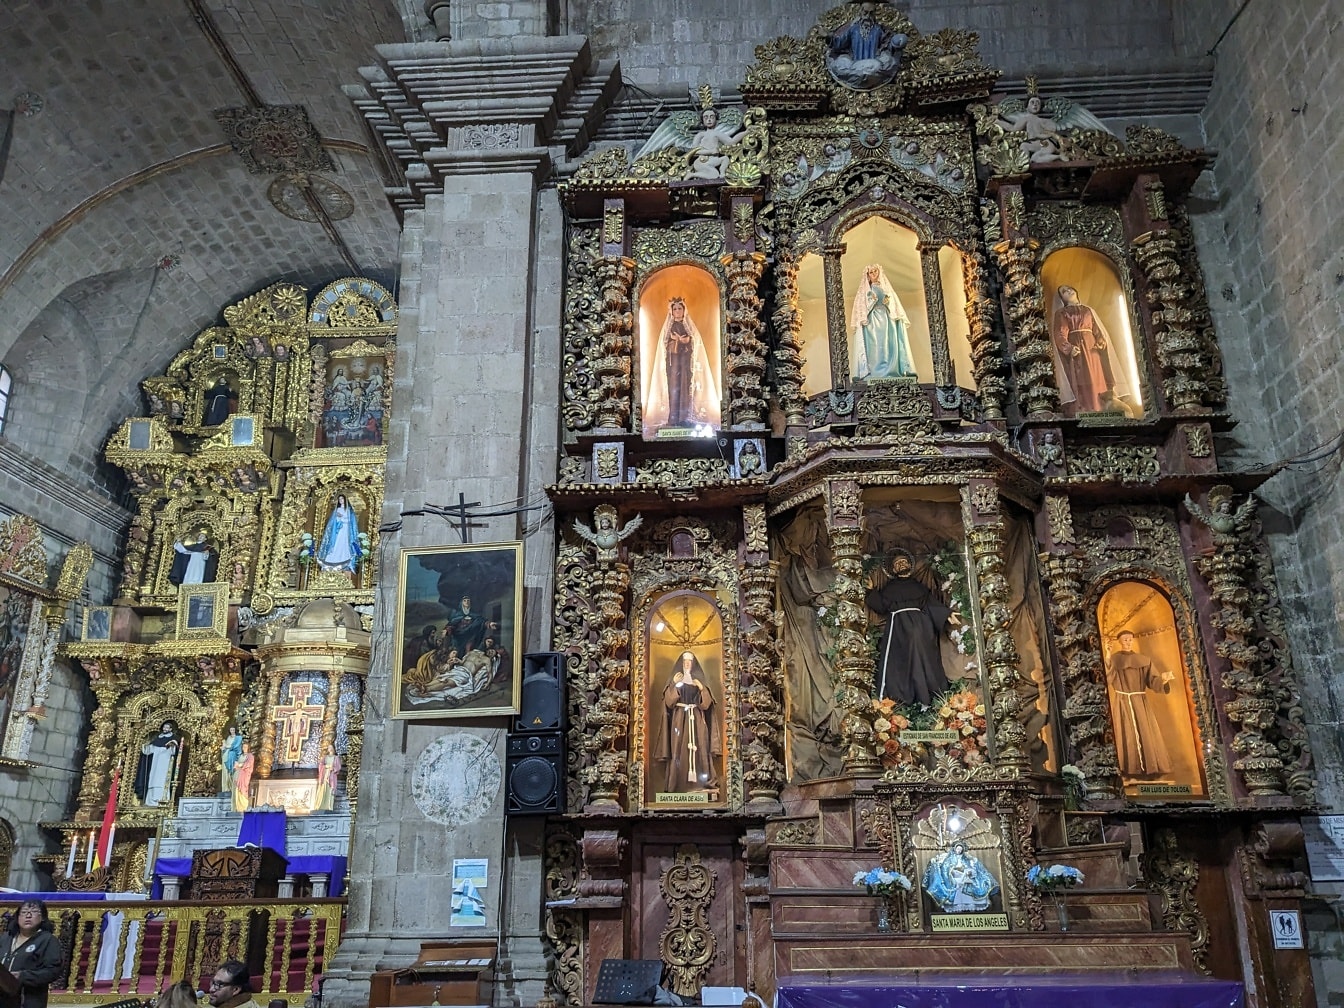 Interior of church with decorated altar with statues of saints in traditional Latino-American style